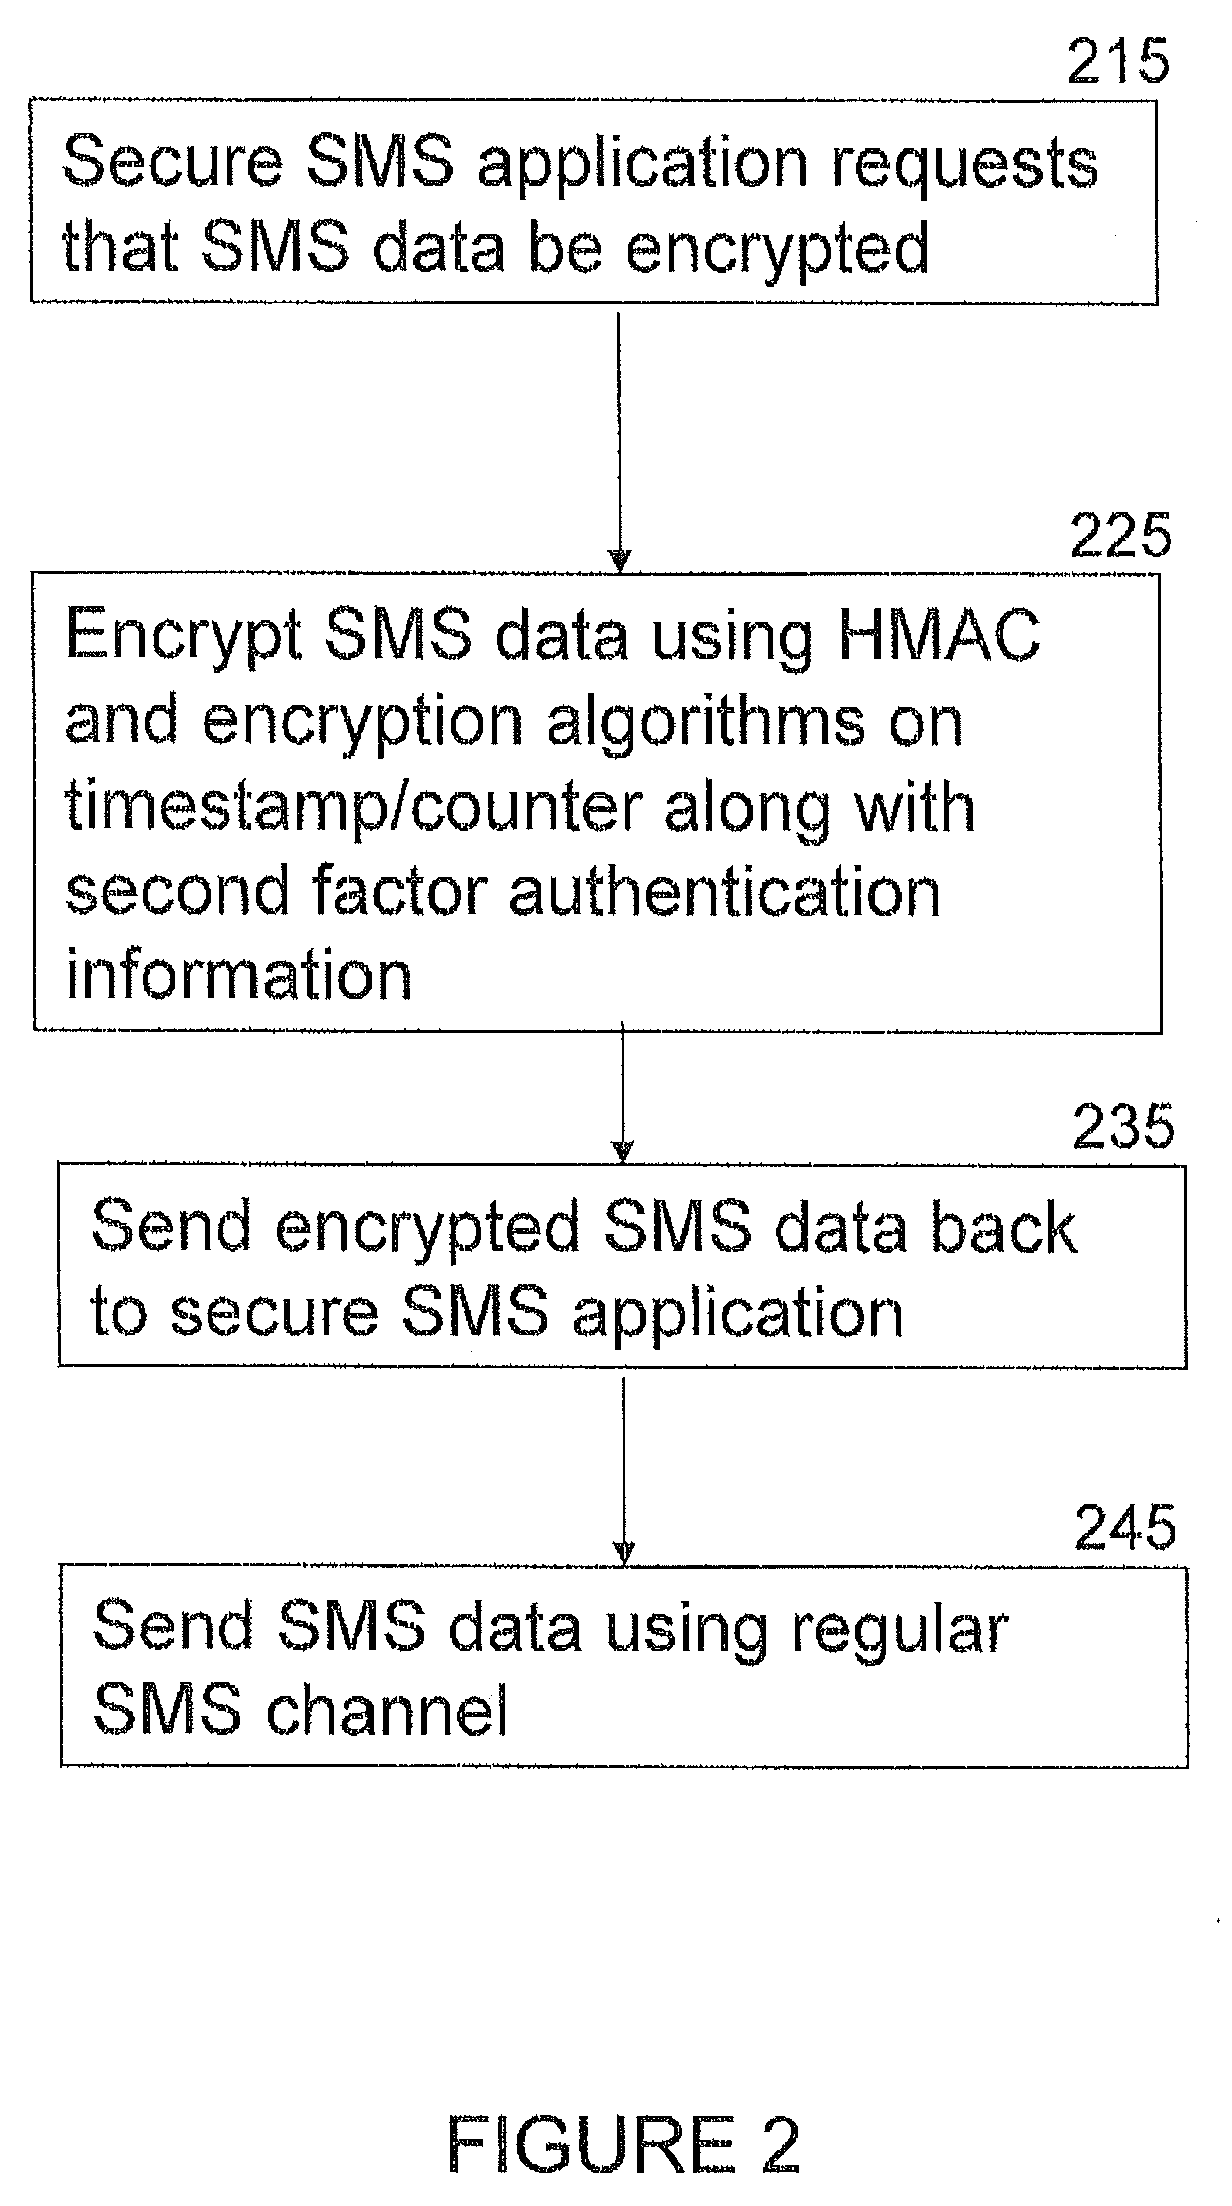 Secure short message service (SMS) communications